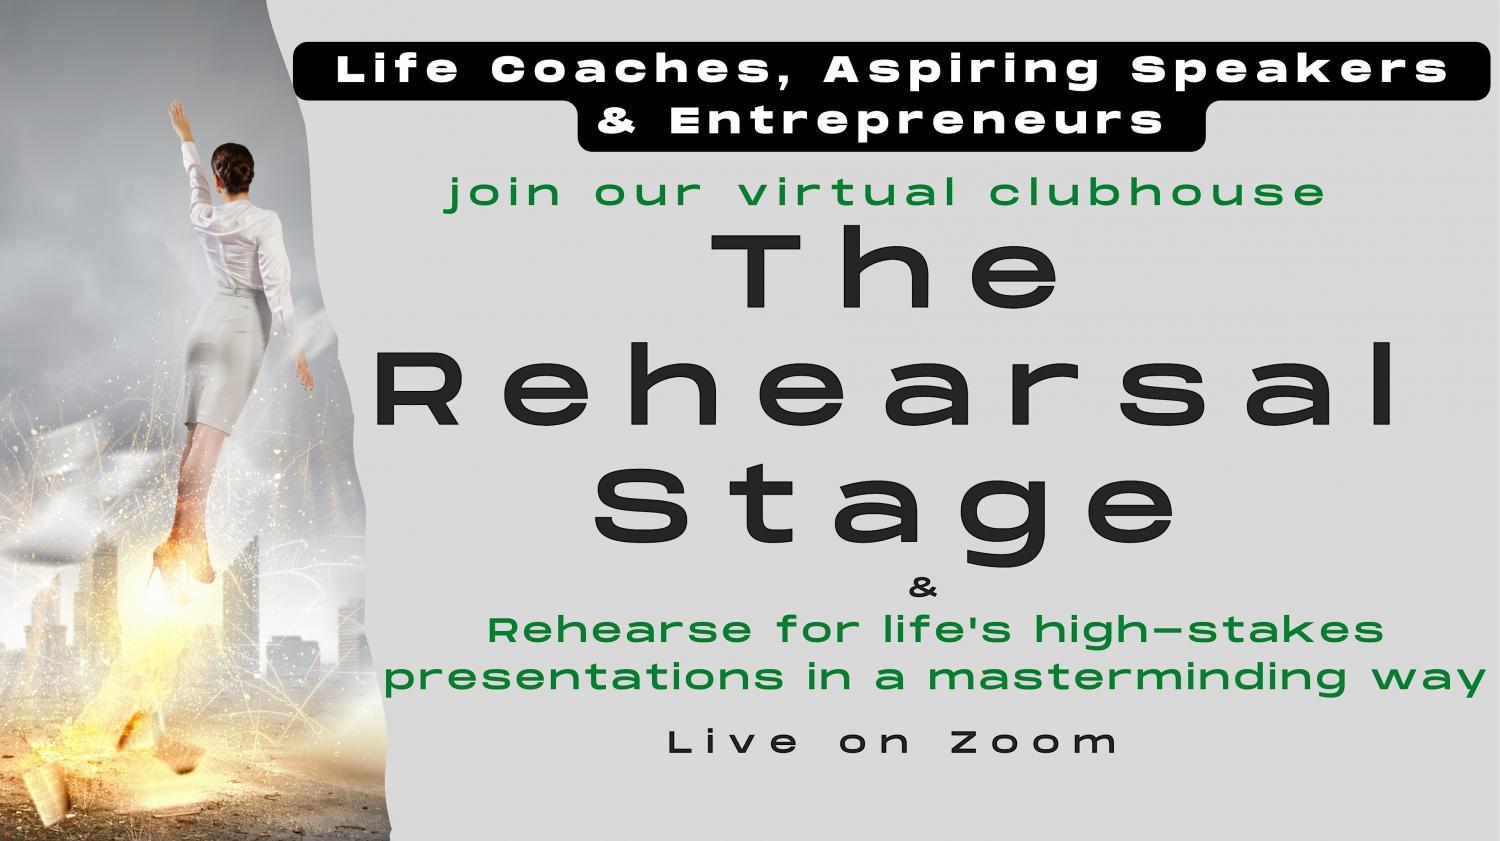 Coaches & Speakers-10x Your Speaking Confidence on The Rehearsal Stage
Tue Jan 3, 12:30 PM - Tue Jan 3, 2:00 PM
in 73 days